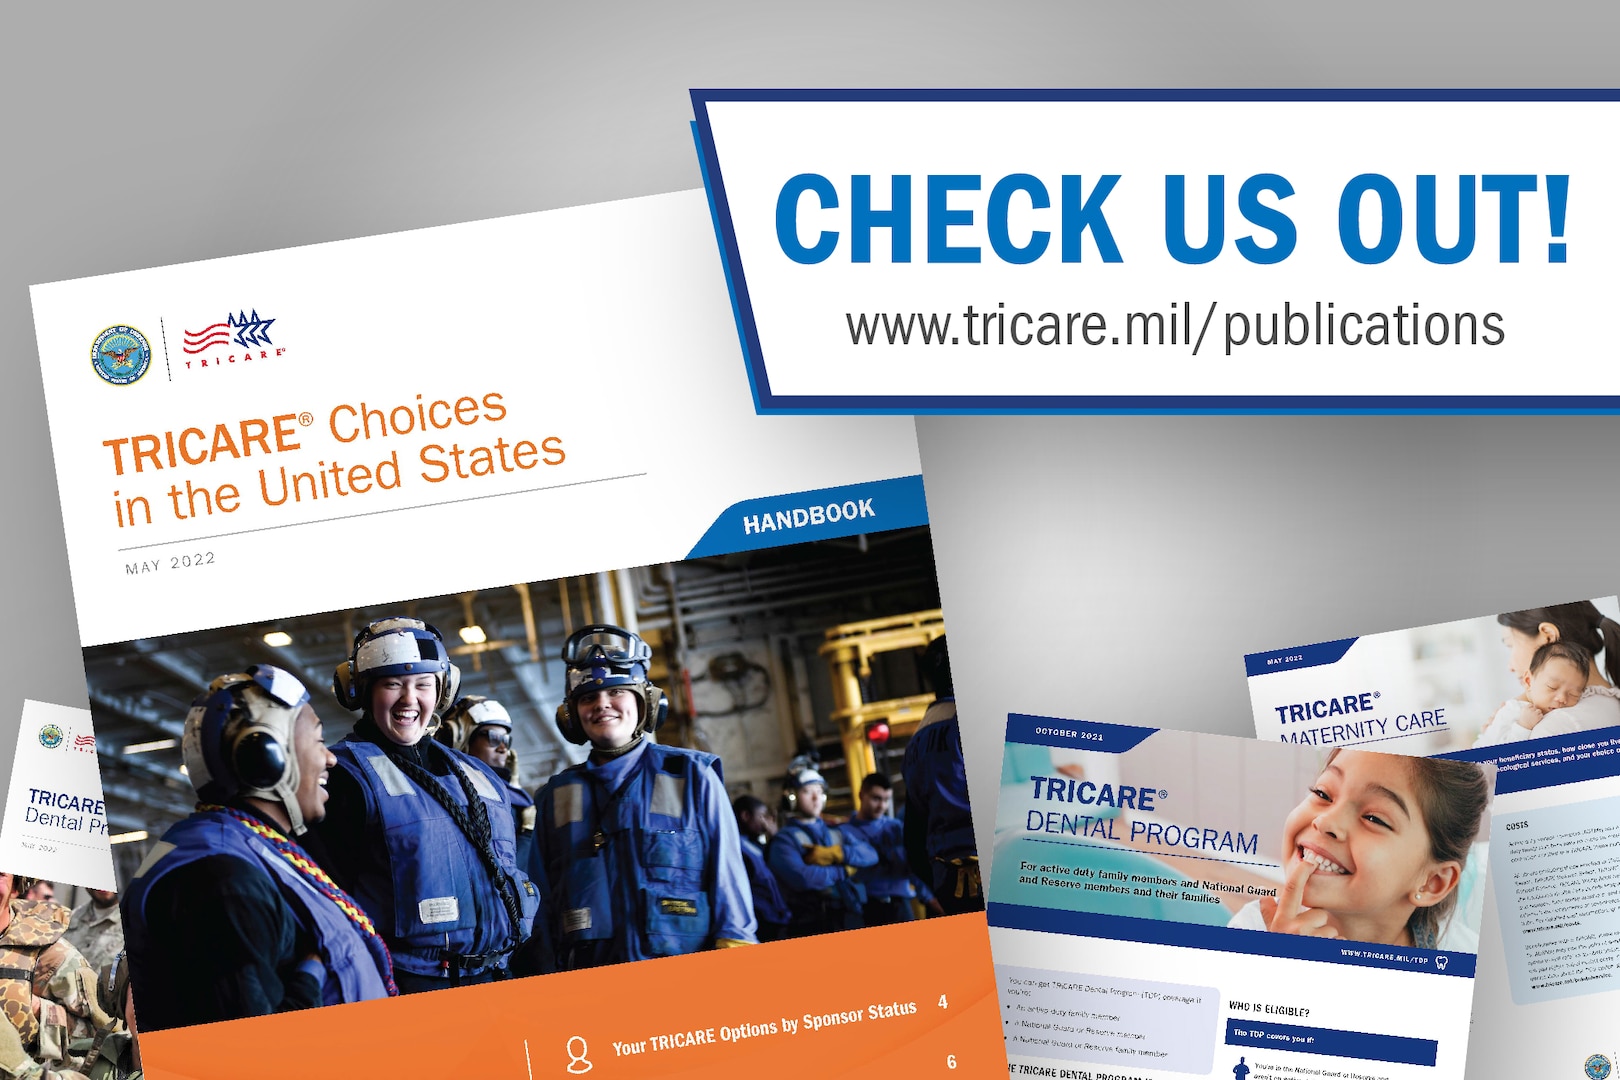 New to TRICARE? Handbook Helps You Learn Your Health Plan Options > TRICARE Newsroom > Articles